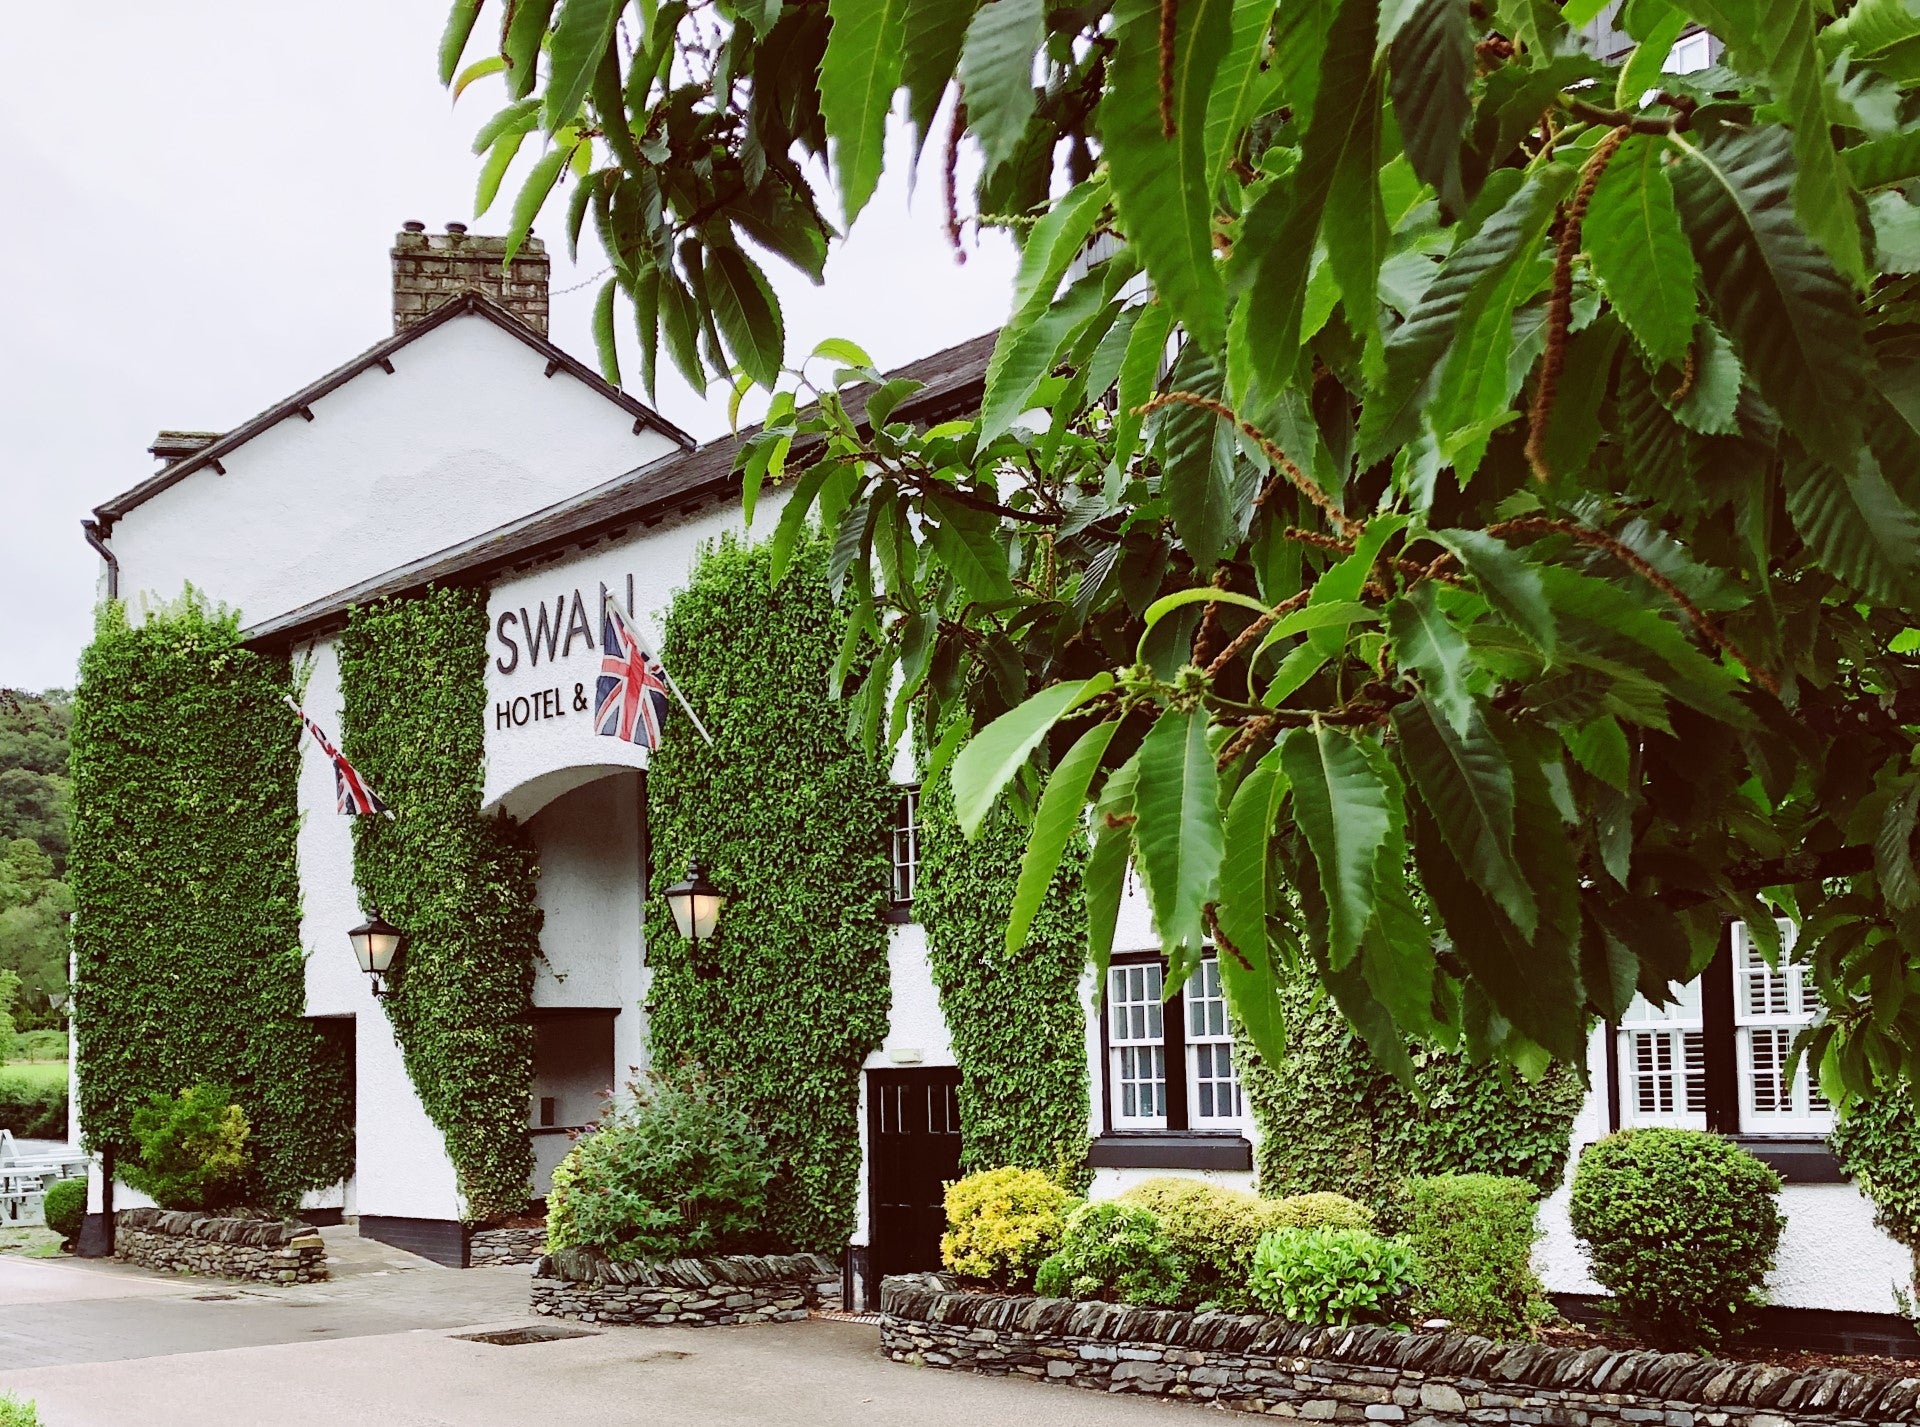 The Swan has retained all its character despite suffering damage from flooding in 2015